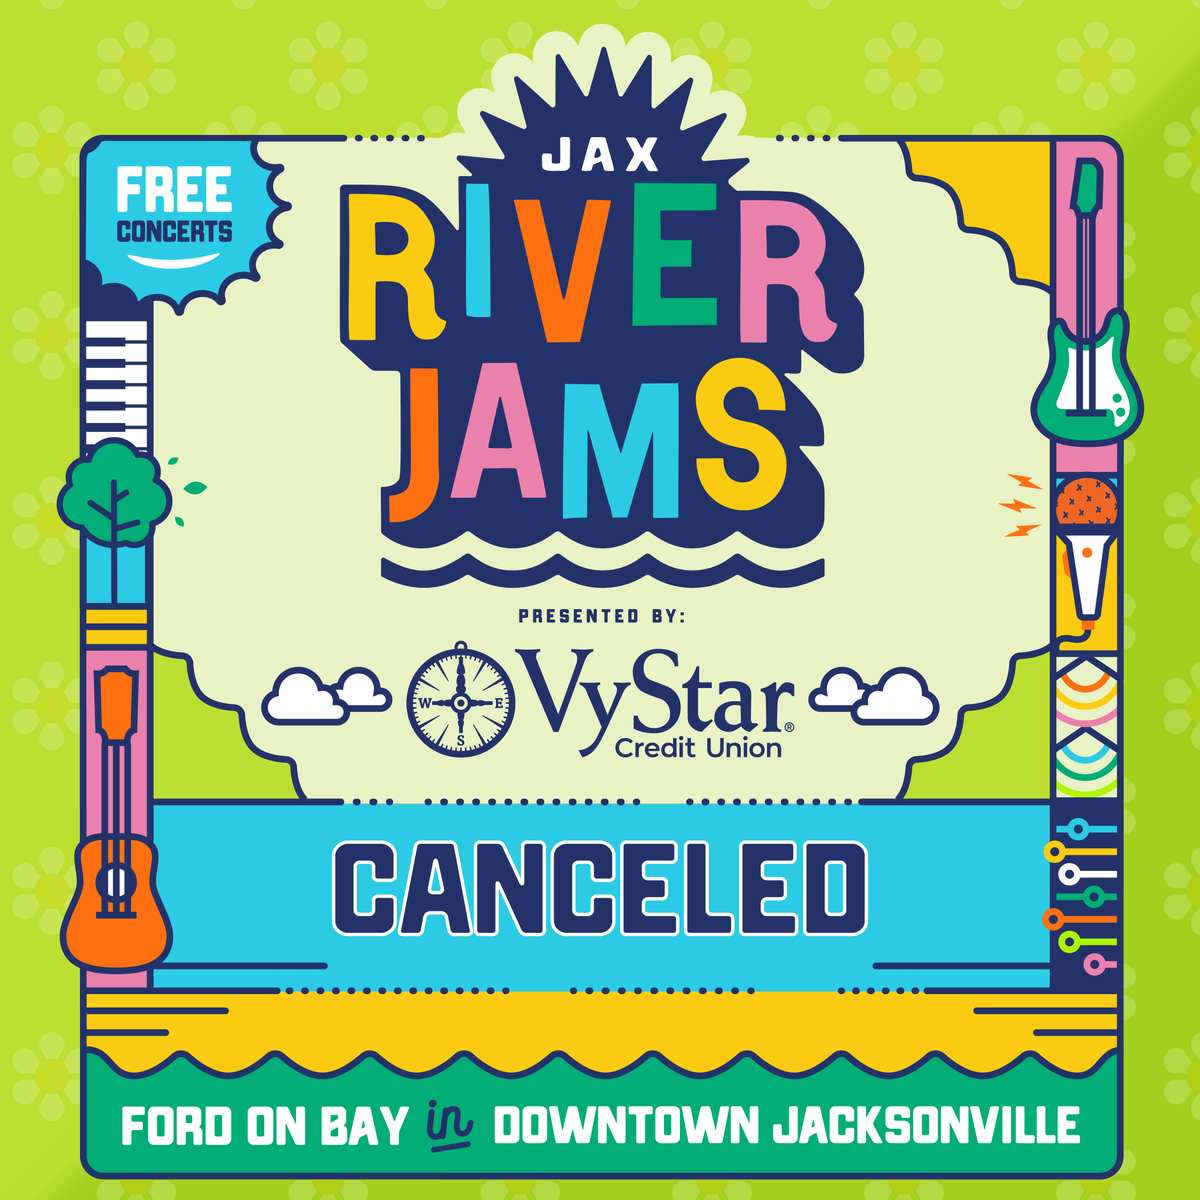 Weather Update: Due to severe weather and in the best interest of public safety, the Jax River Jams production and safety partners have made the tough decision to cancel tonight's Jax River Jams.☔️ We'll see you next Thursday, 4/18 🎶🤘 Learn More: jaxriverjams.com